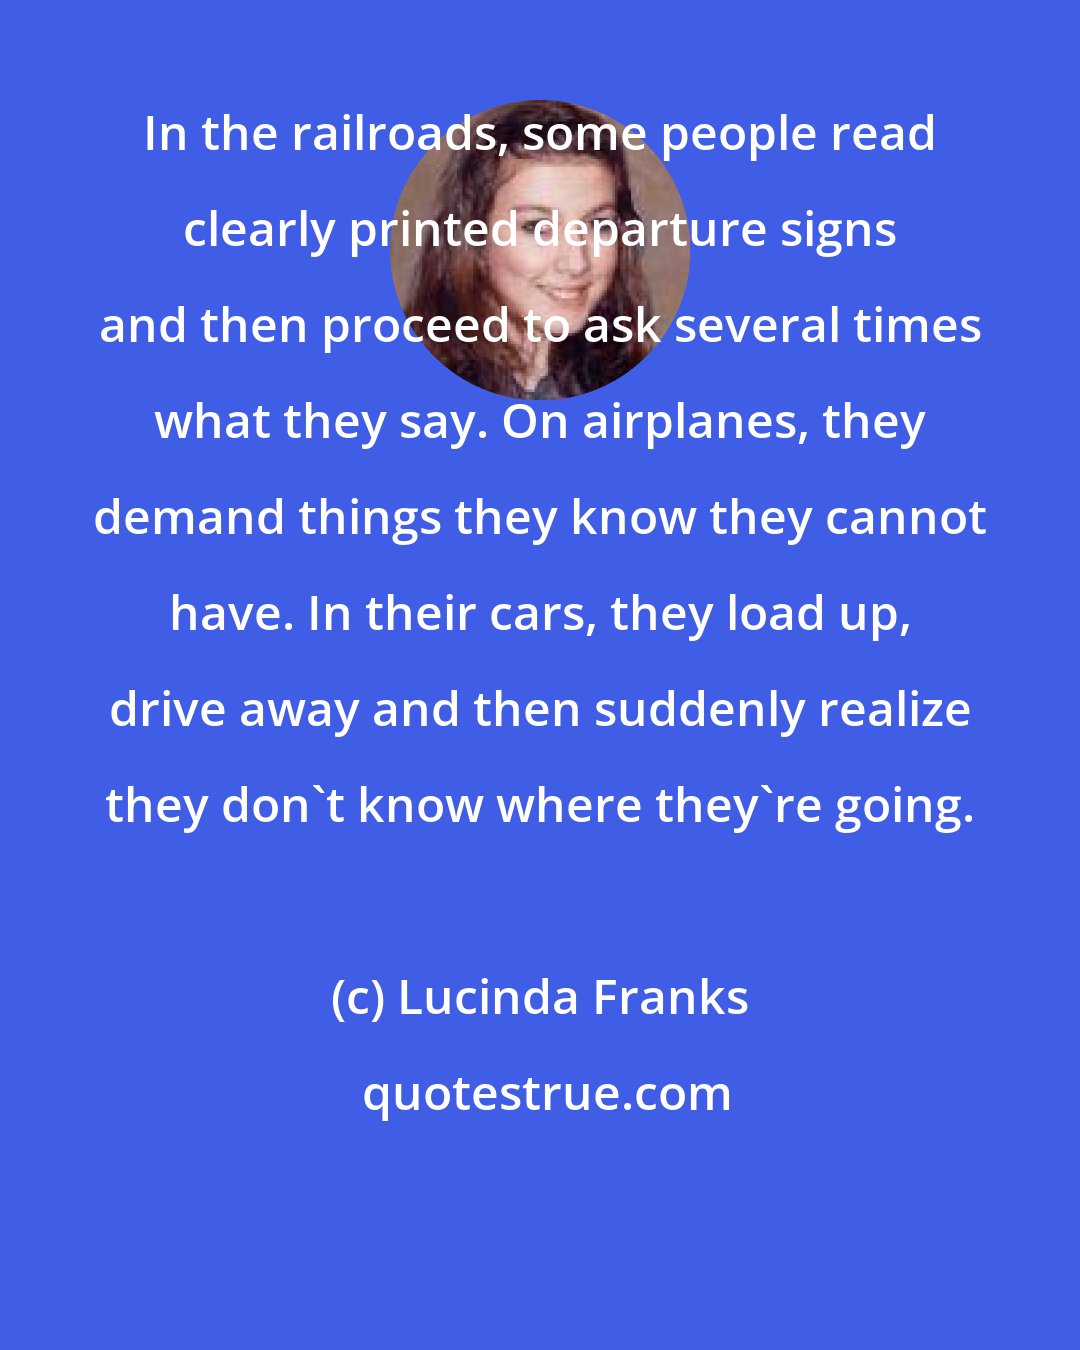 Lucinda Franks: In the railroads, some people read clearly printed departure signs and then proceed to ask several times what they say. On airplanes, they demand things they know they cannot have. In their cars, they load up, drive away and then suddenly realize they don't know where they're going.